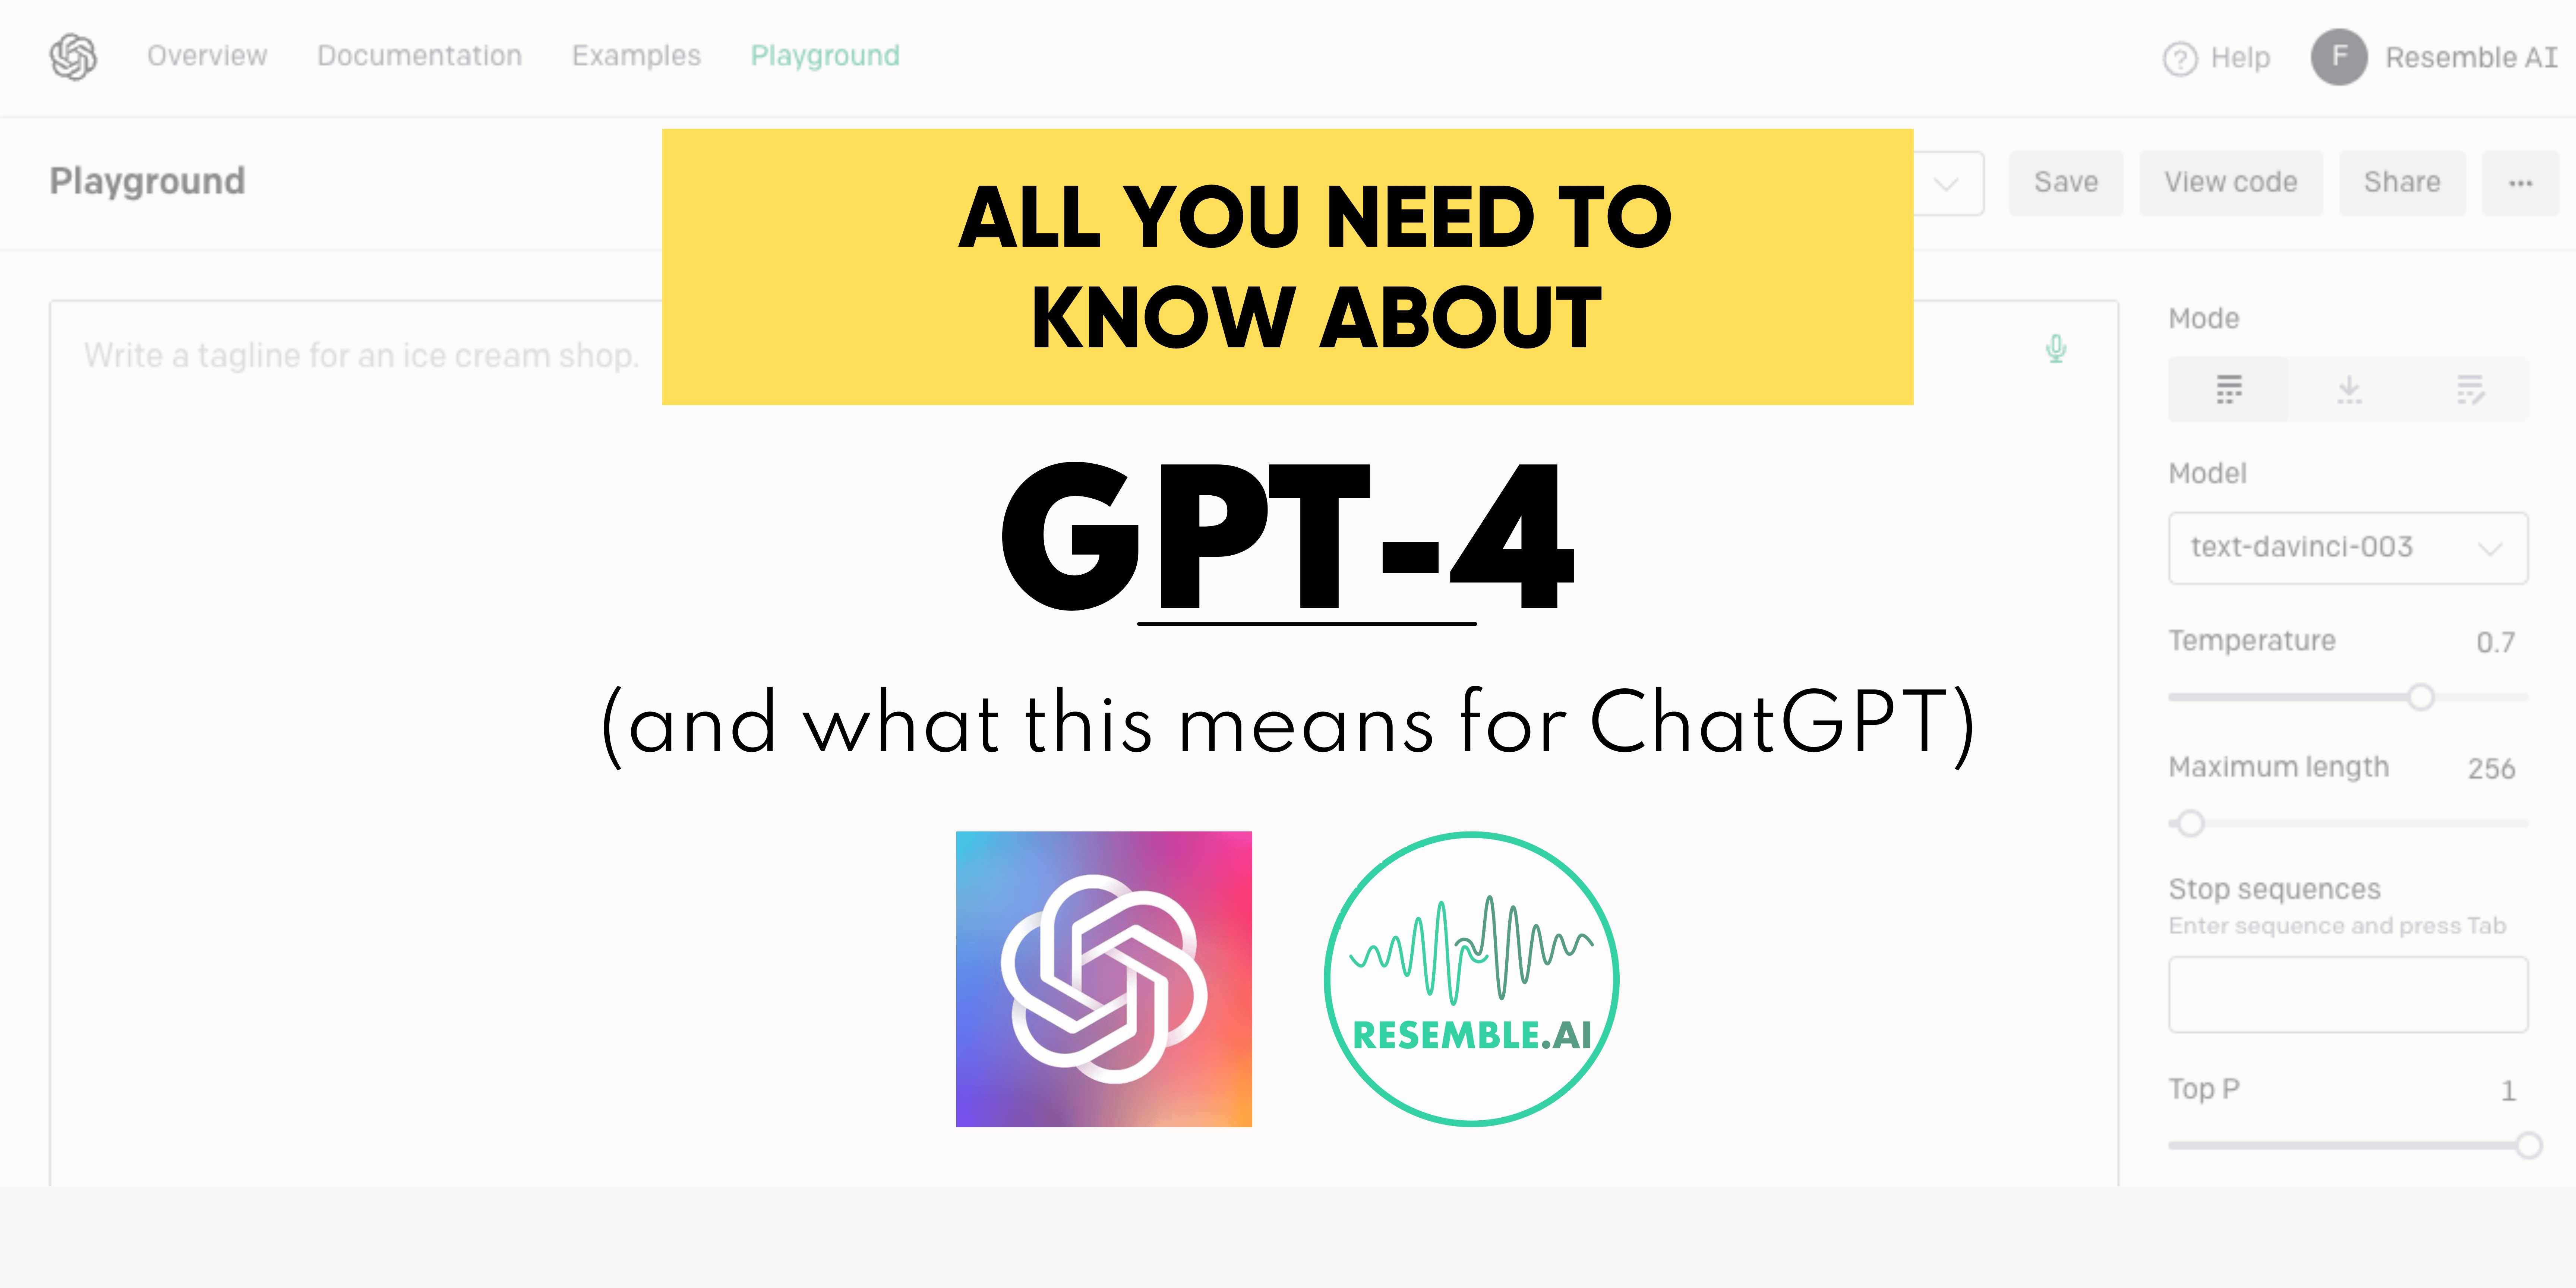 All you need to know about GPT-4 and what this means for ChatGPT